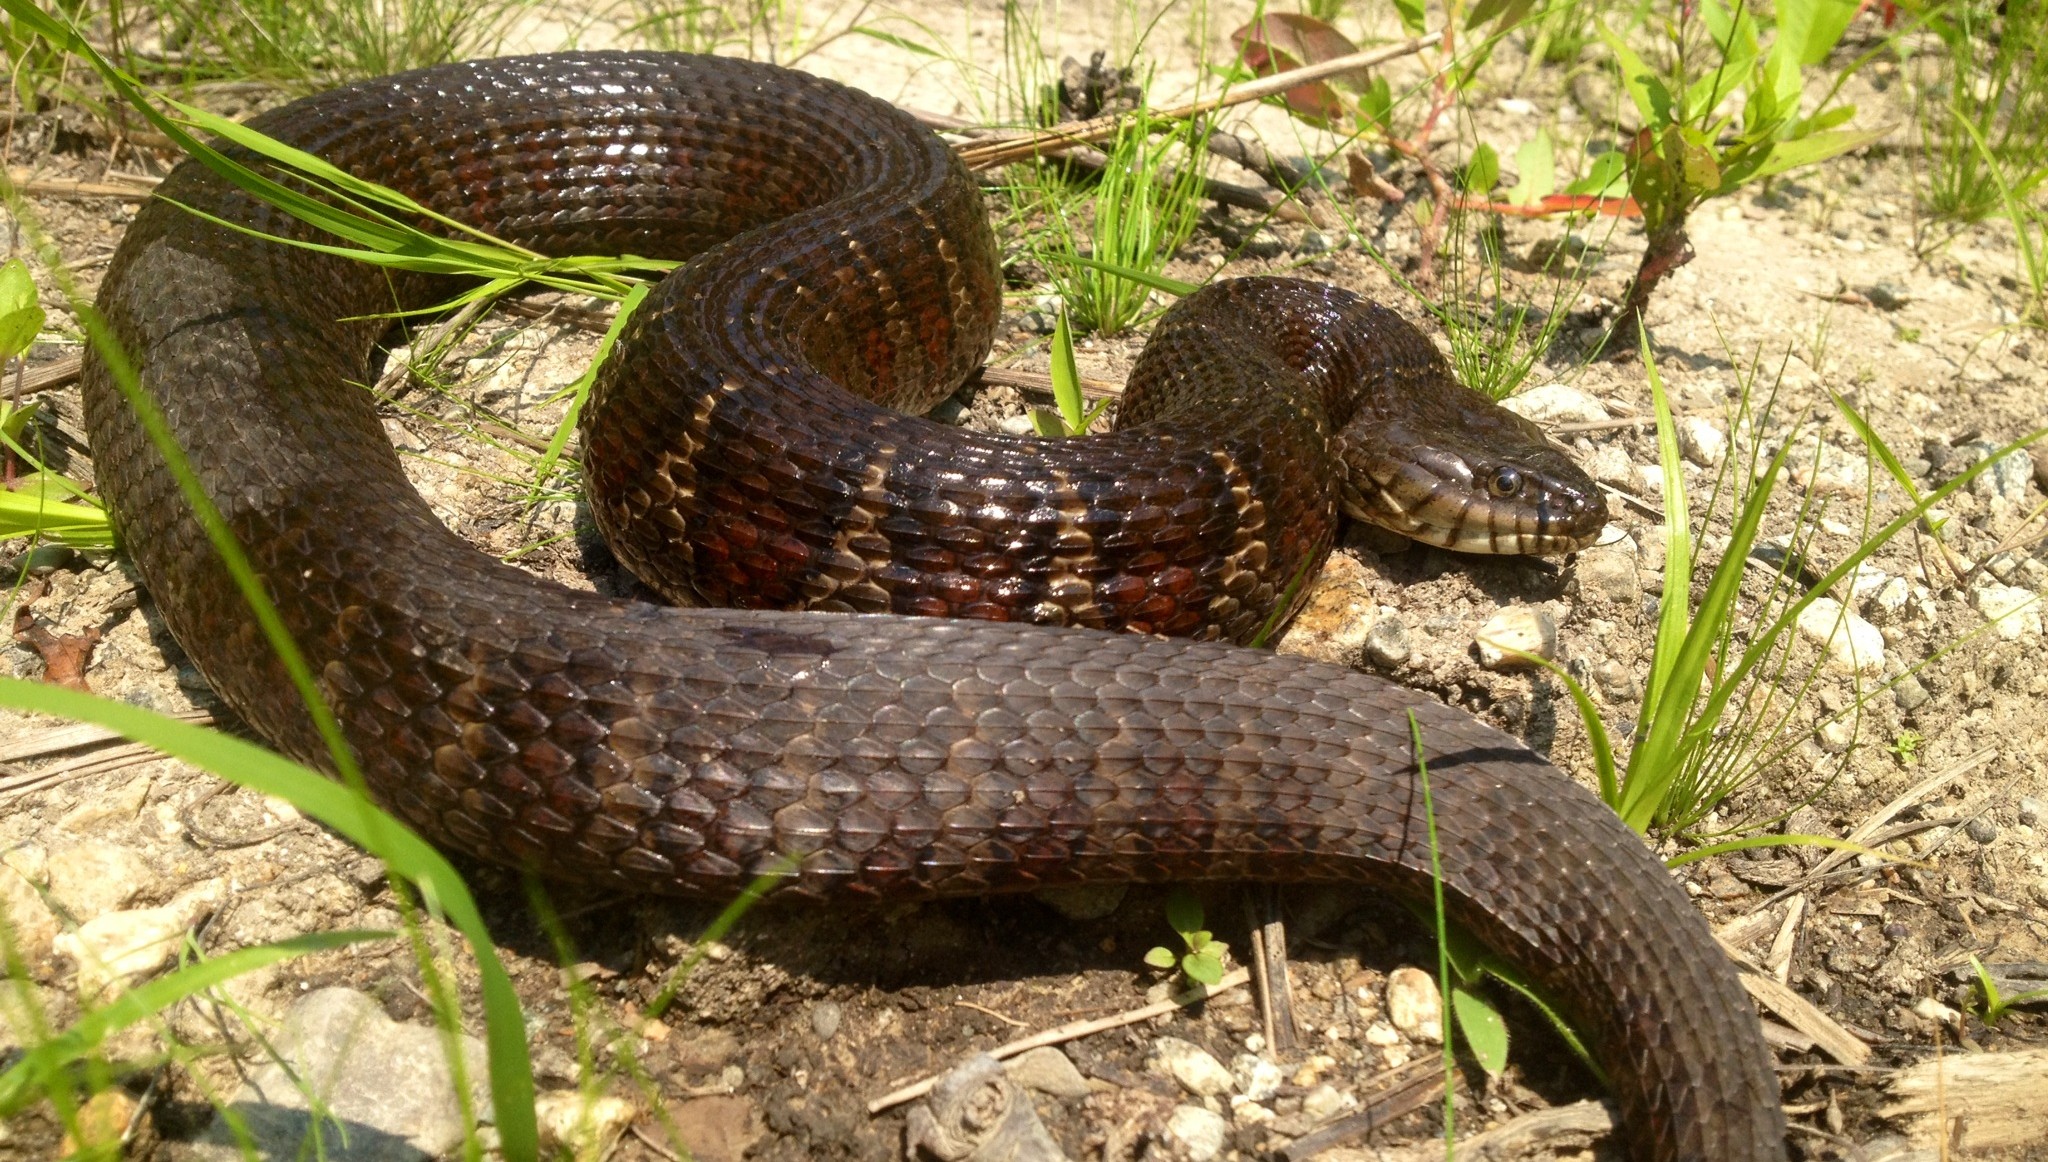 Water Snakes Invading California Threaten Native Species | KQED